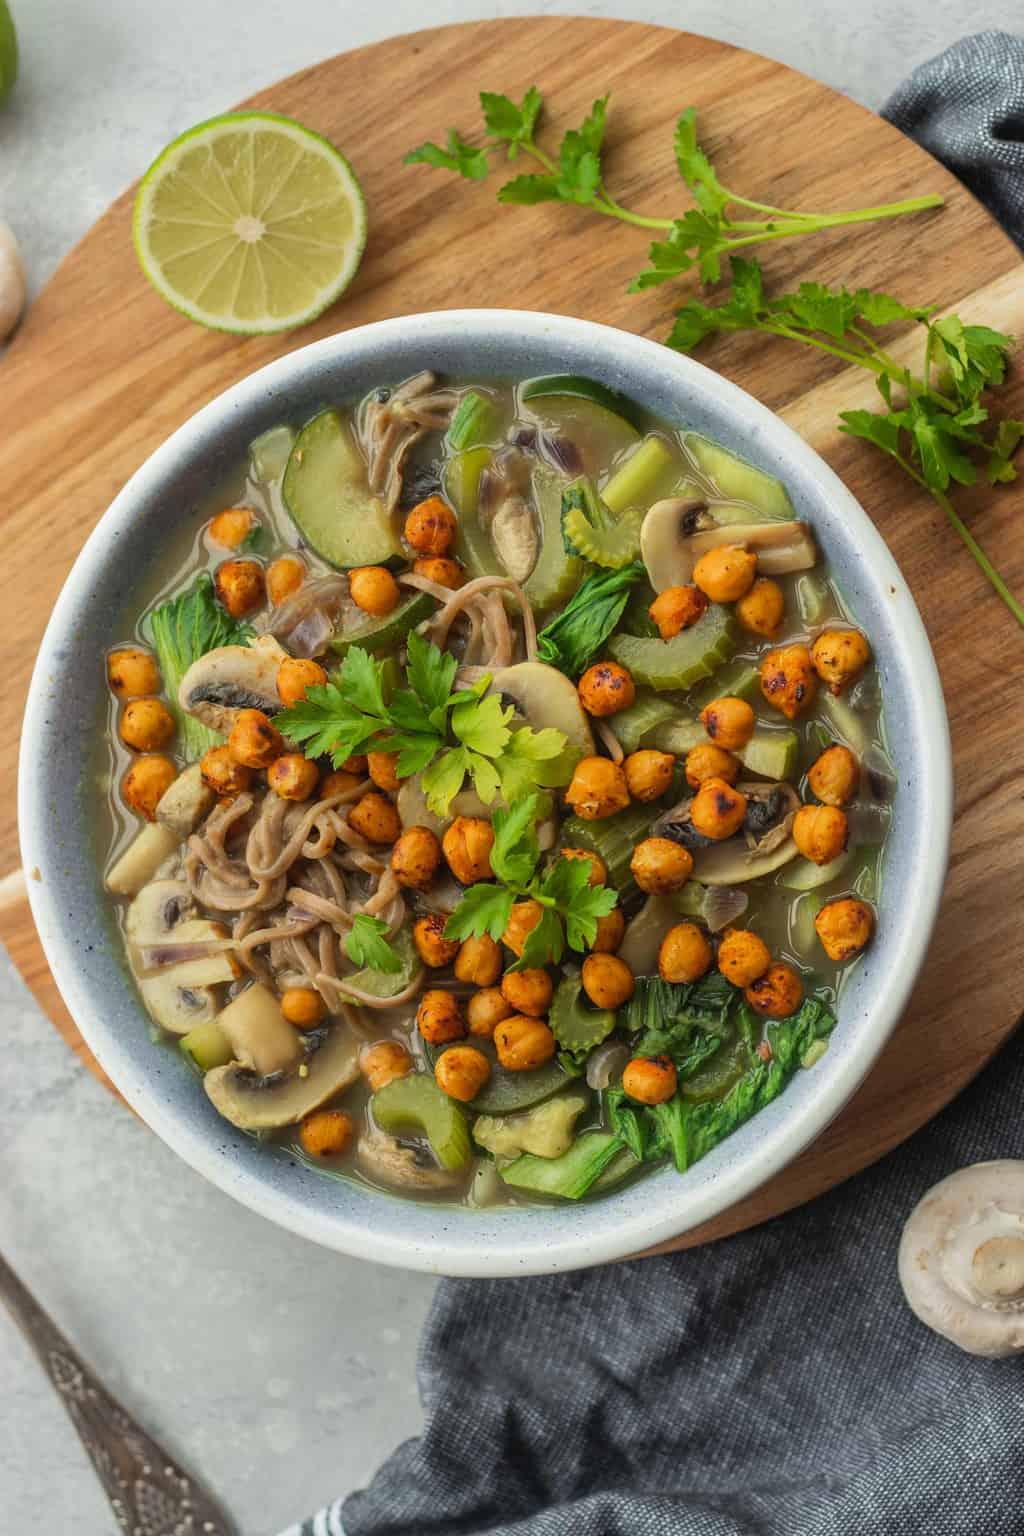 Gluten-free vegan noodle soup with chickpeas and vegetables